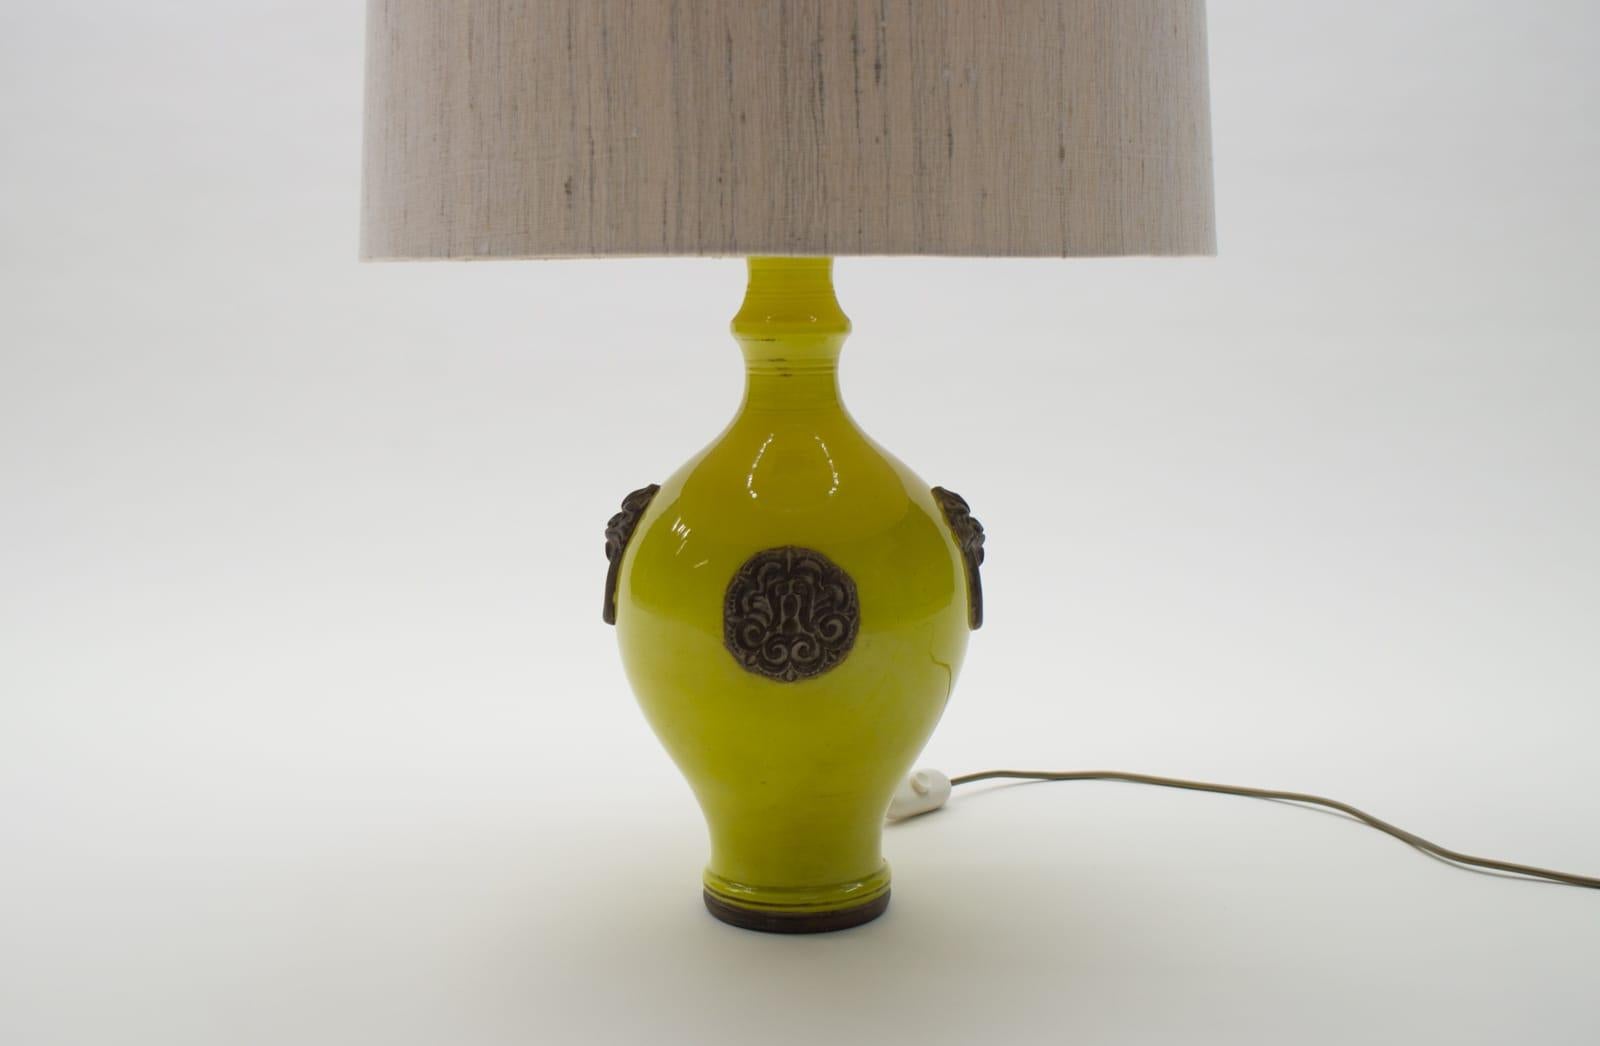 Oatmeal and Yellow Gilt Glazed Ceramic Table Lamp by Ugo Zaccagnini, Italy 1960s (Italienisch) im Angebot